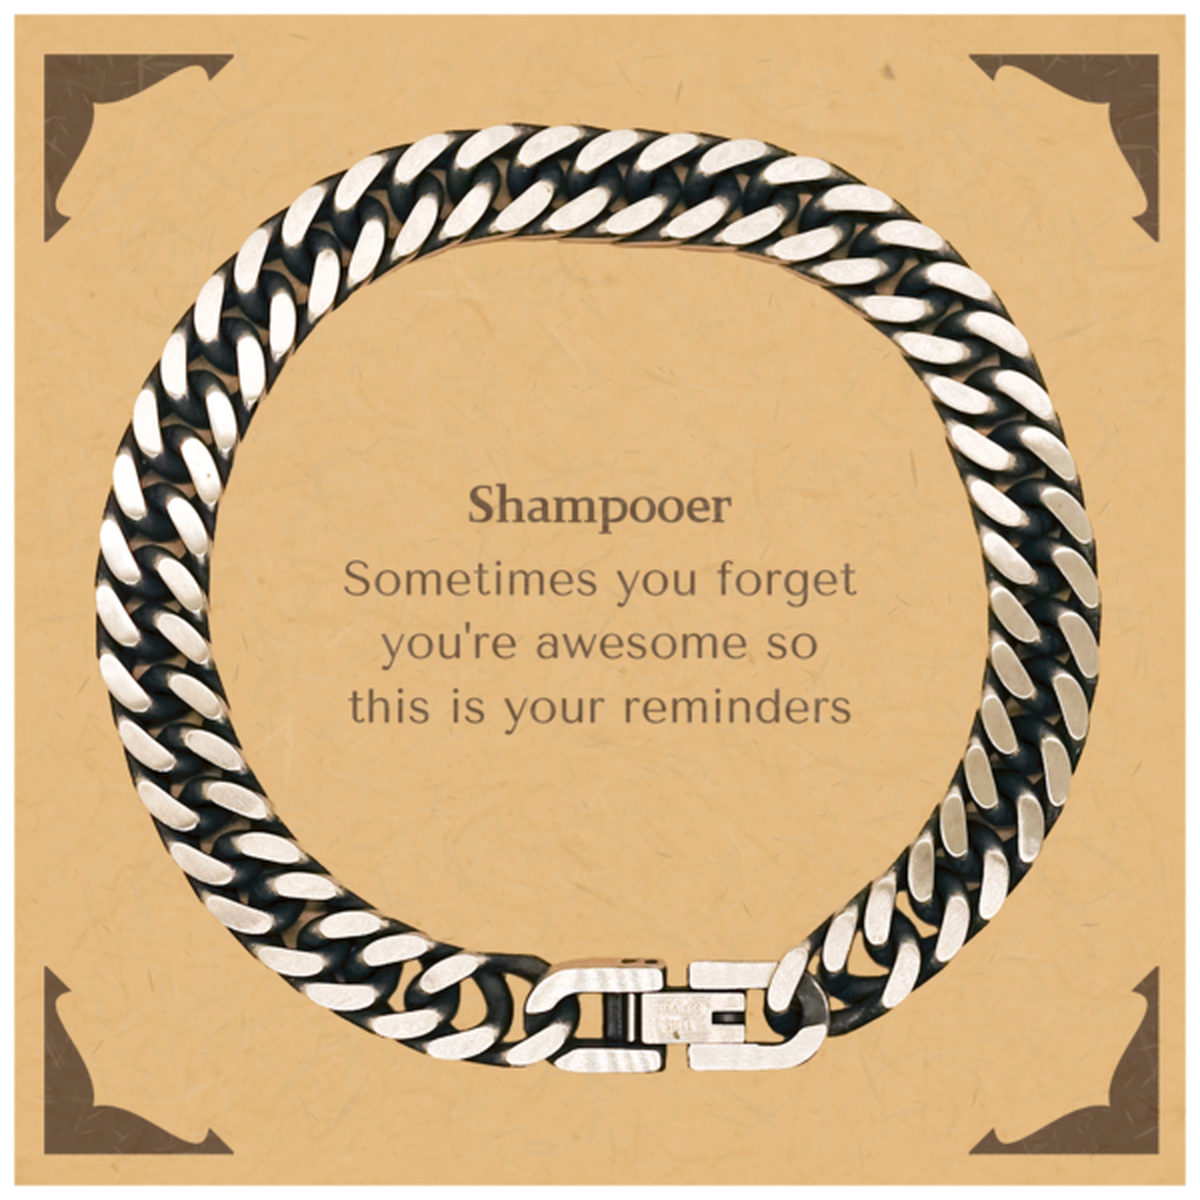 Sentimental Shampooer Cuban Link Chain Bracelet, Shampooer Sometimes you forget you're awesome so this is your reminders, Graduation Christmas Birthday Gifts for Shampooer, Men, Women, Coworkers